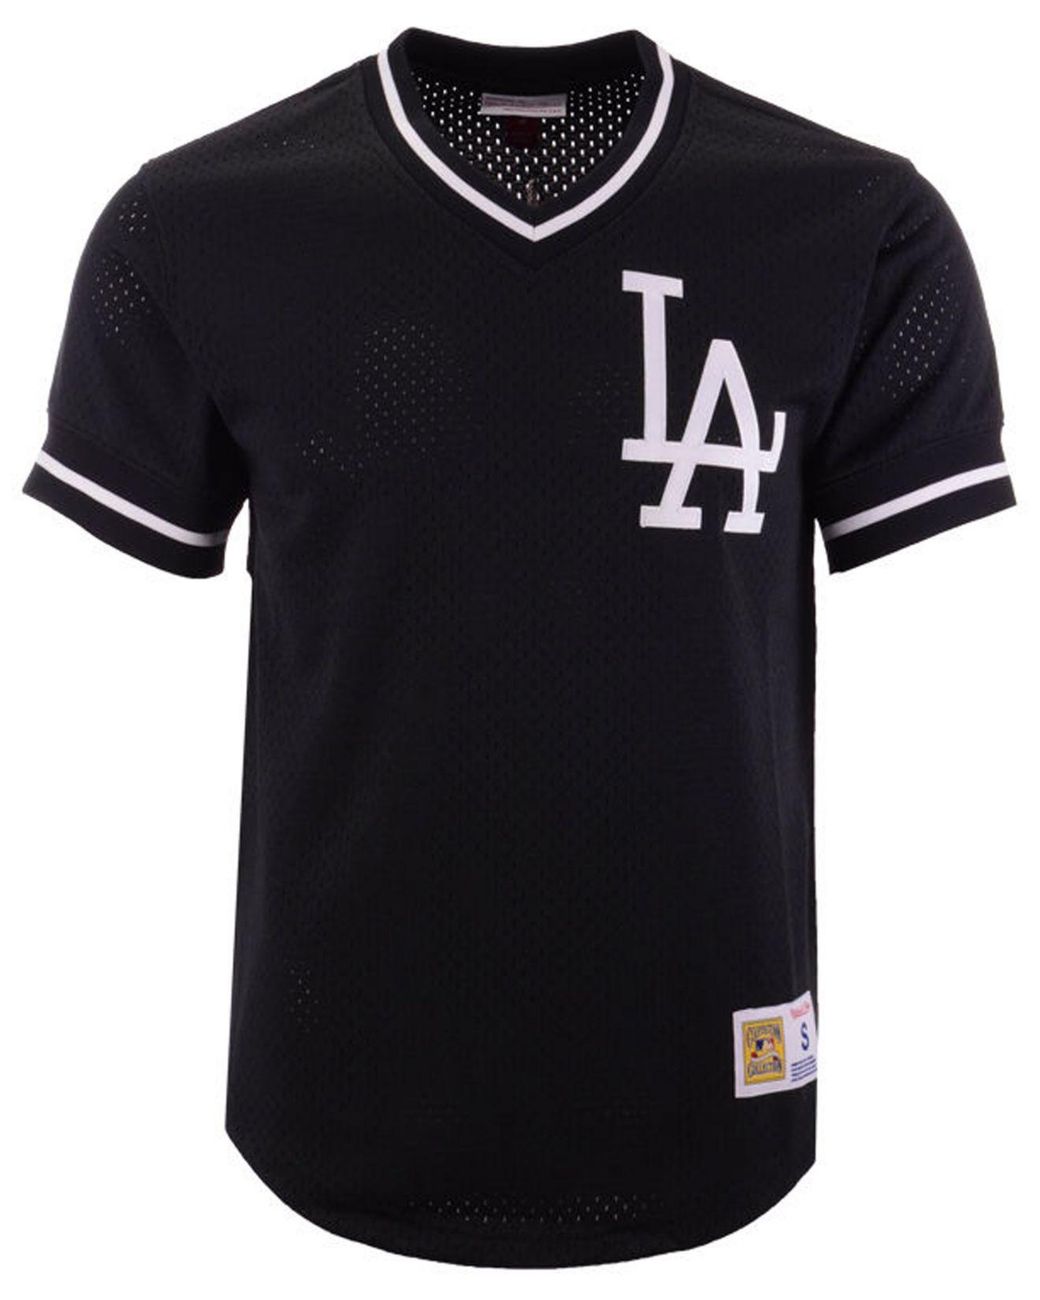 Mitchell & Ness Los Angeles Dodgers Mesh V-neck Jersey in Black